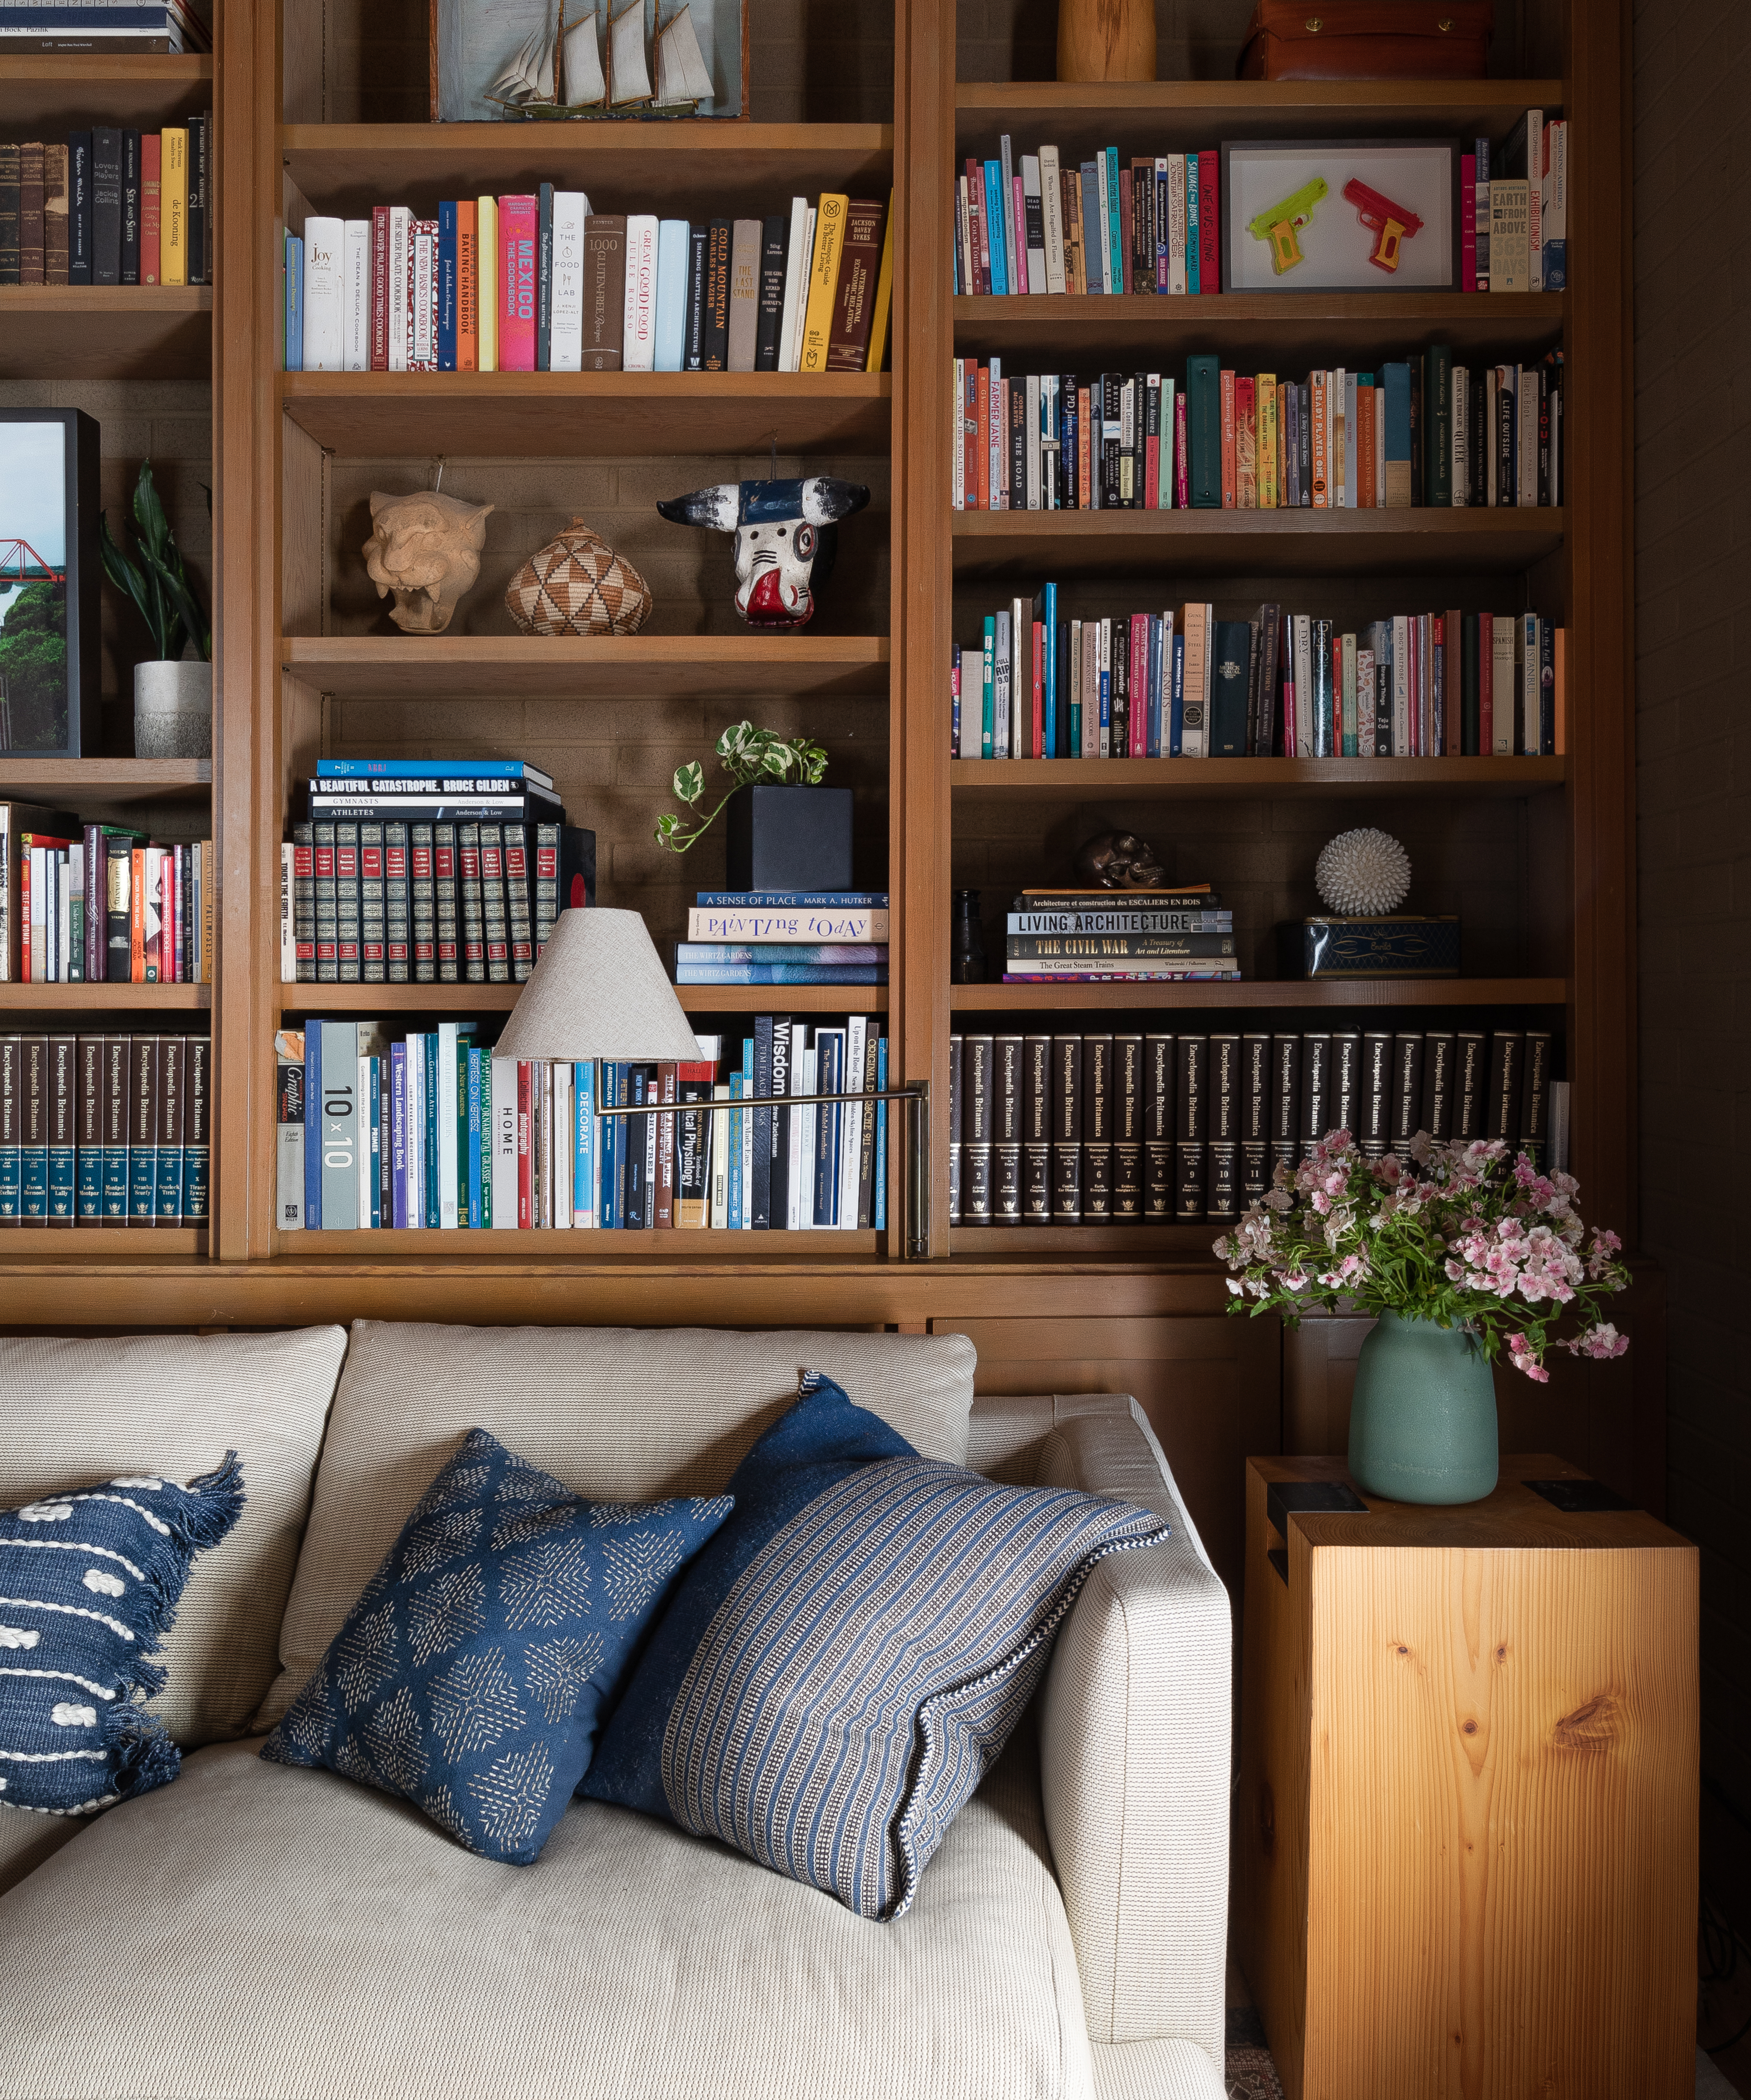 The side table and couch in the library/office are captured in detail, showcasing their design and texture, adding to the room's cozy and practical atmosphere.